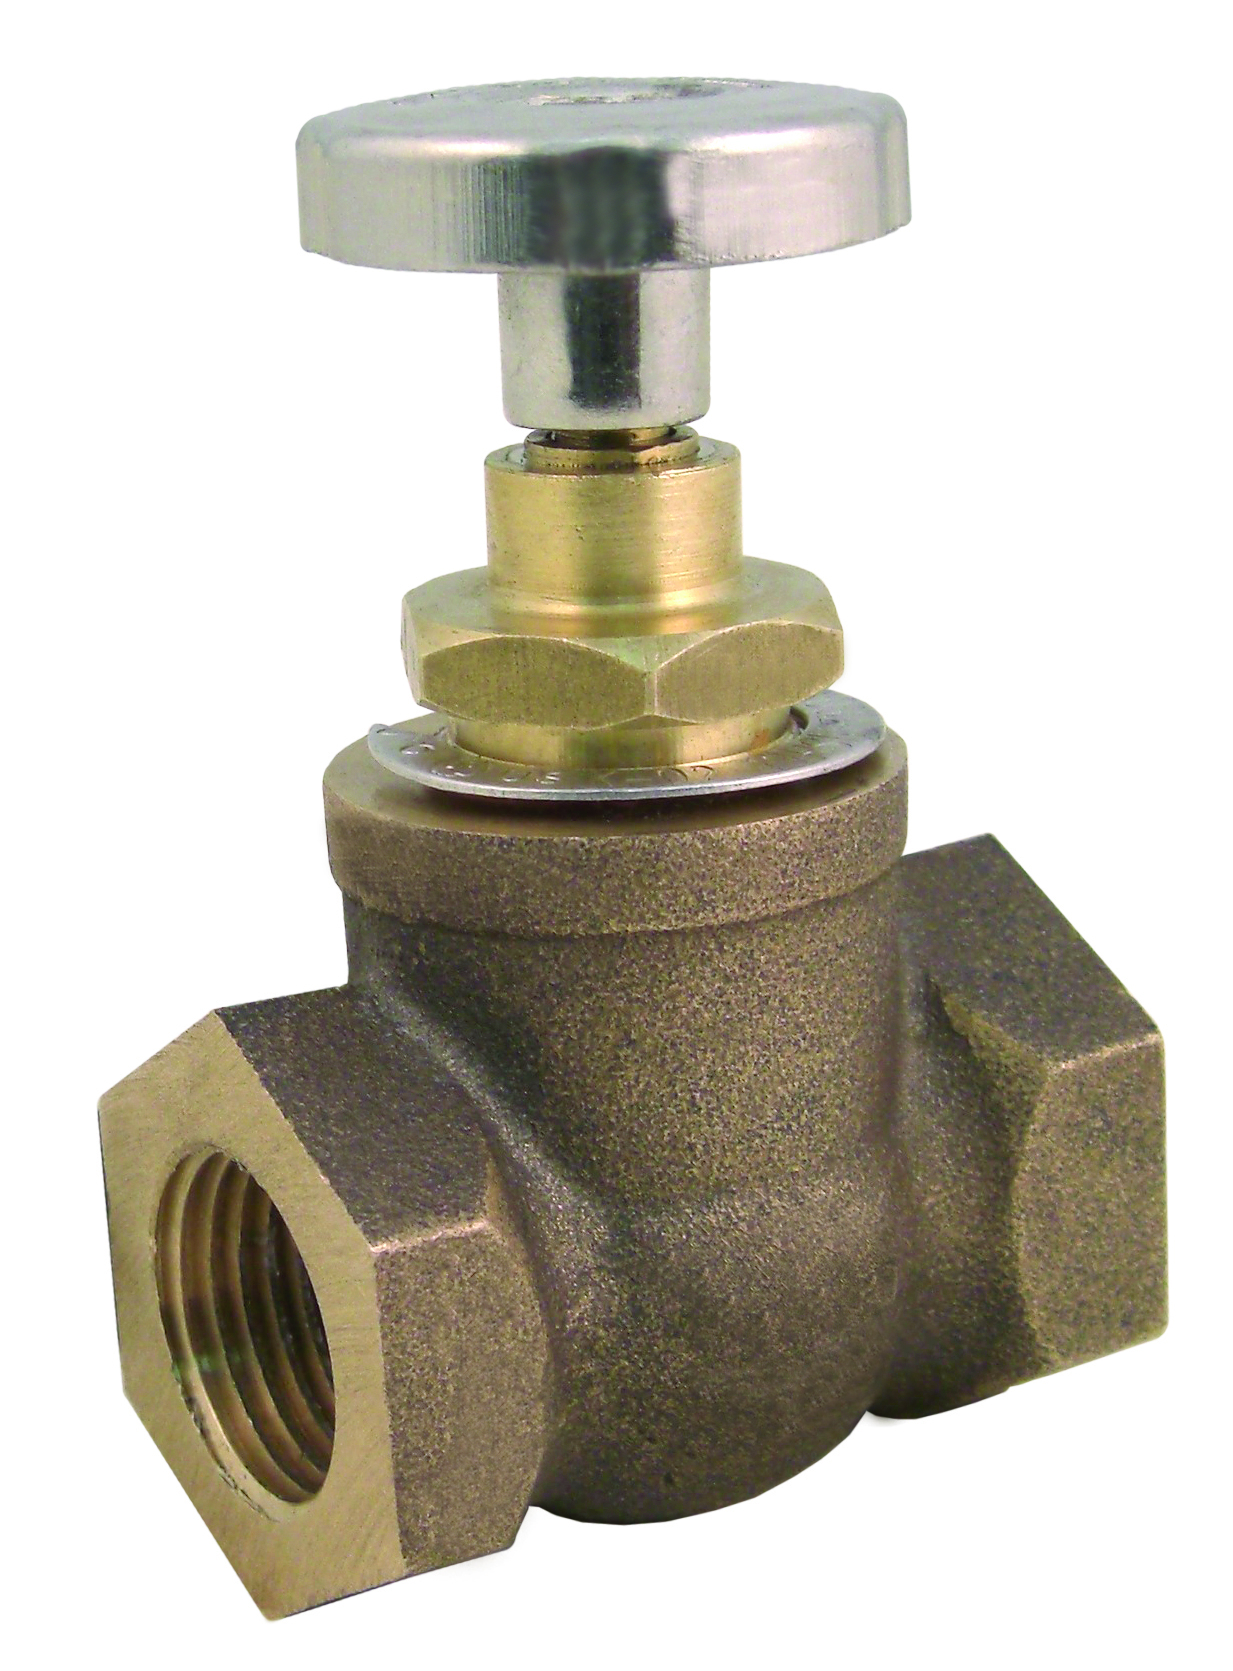 Firomatic® fusible safety valves